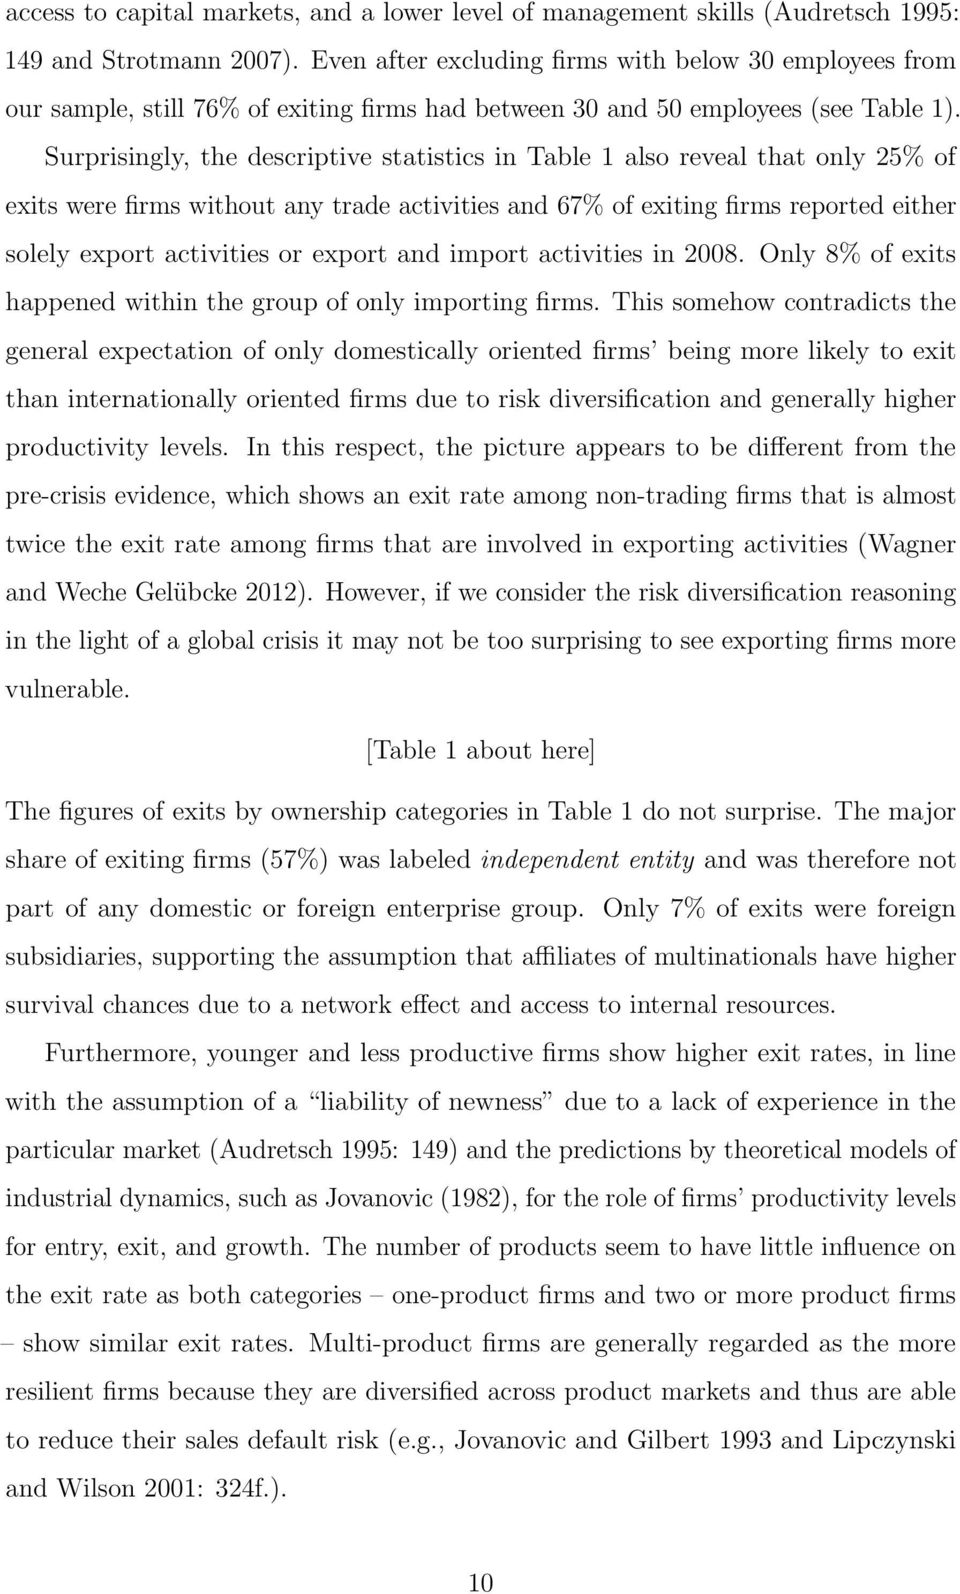 Surprisingly, the descriptive statistics in Table 1 also reveal that only 25% of exits were firms without any trade activities and 67% of exiting firms reported either solely export activities or